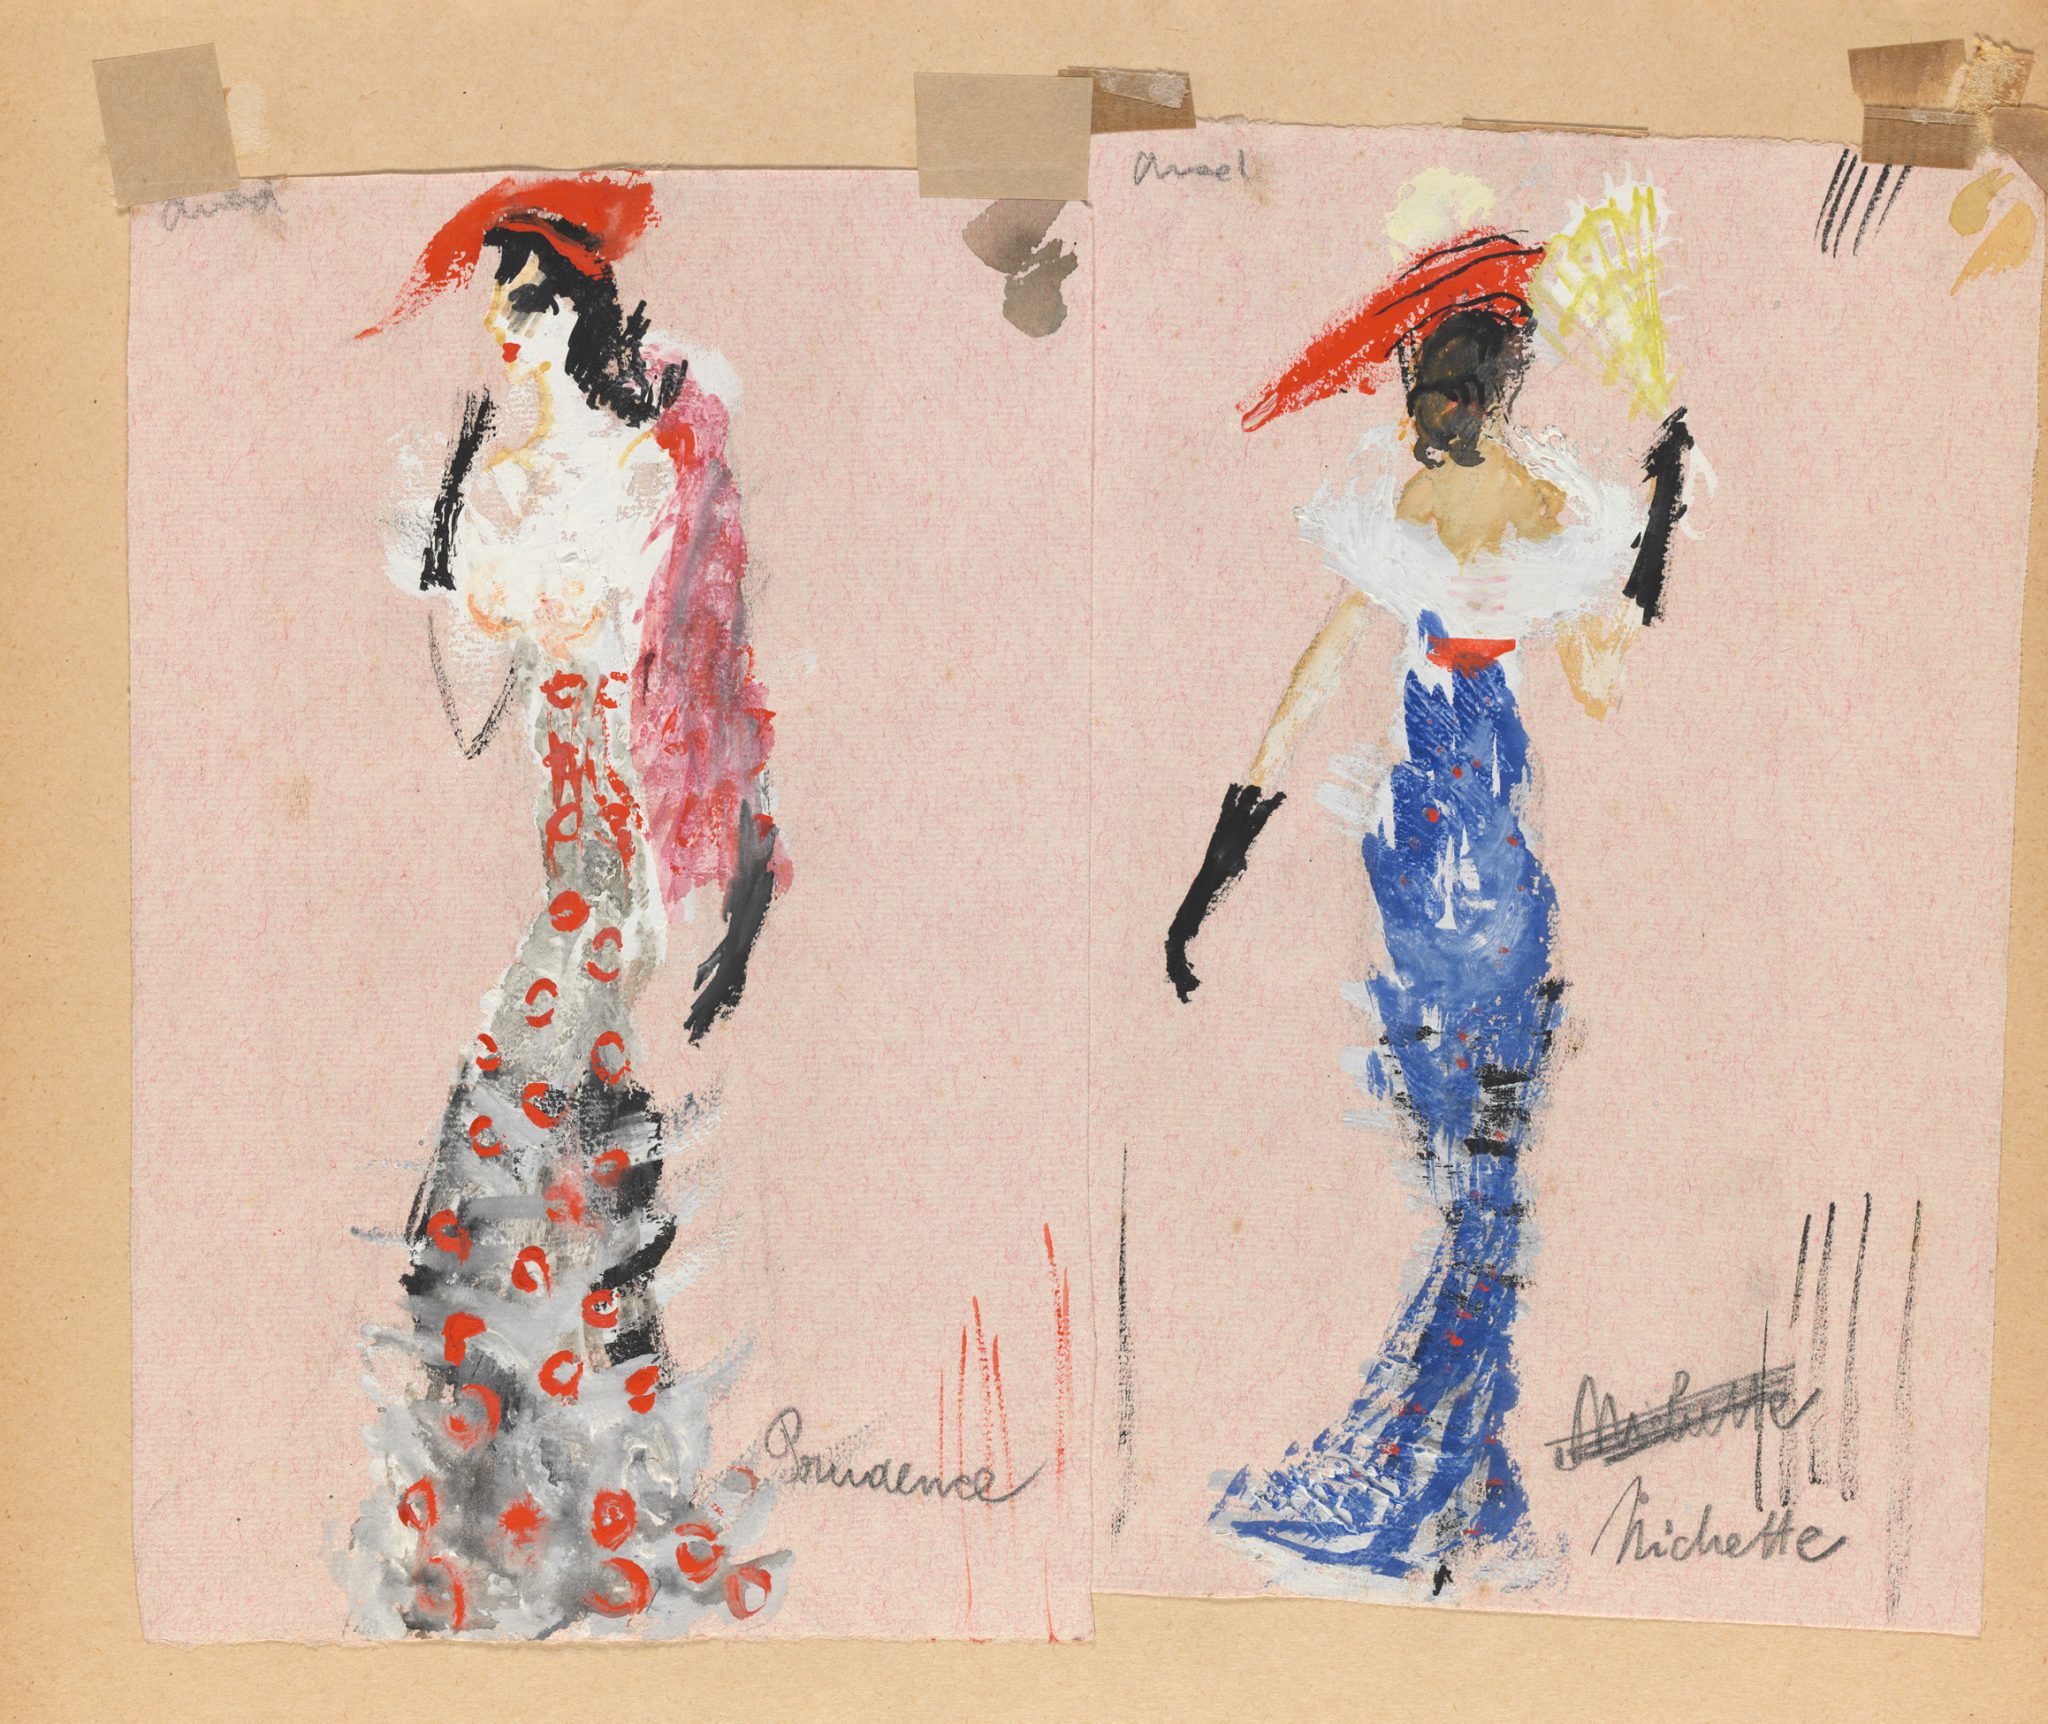 Václav Chad - Prudence (Study of a costume for operette) + Nichette (Study of a costume for operette)